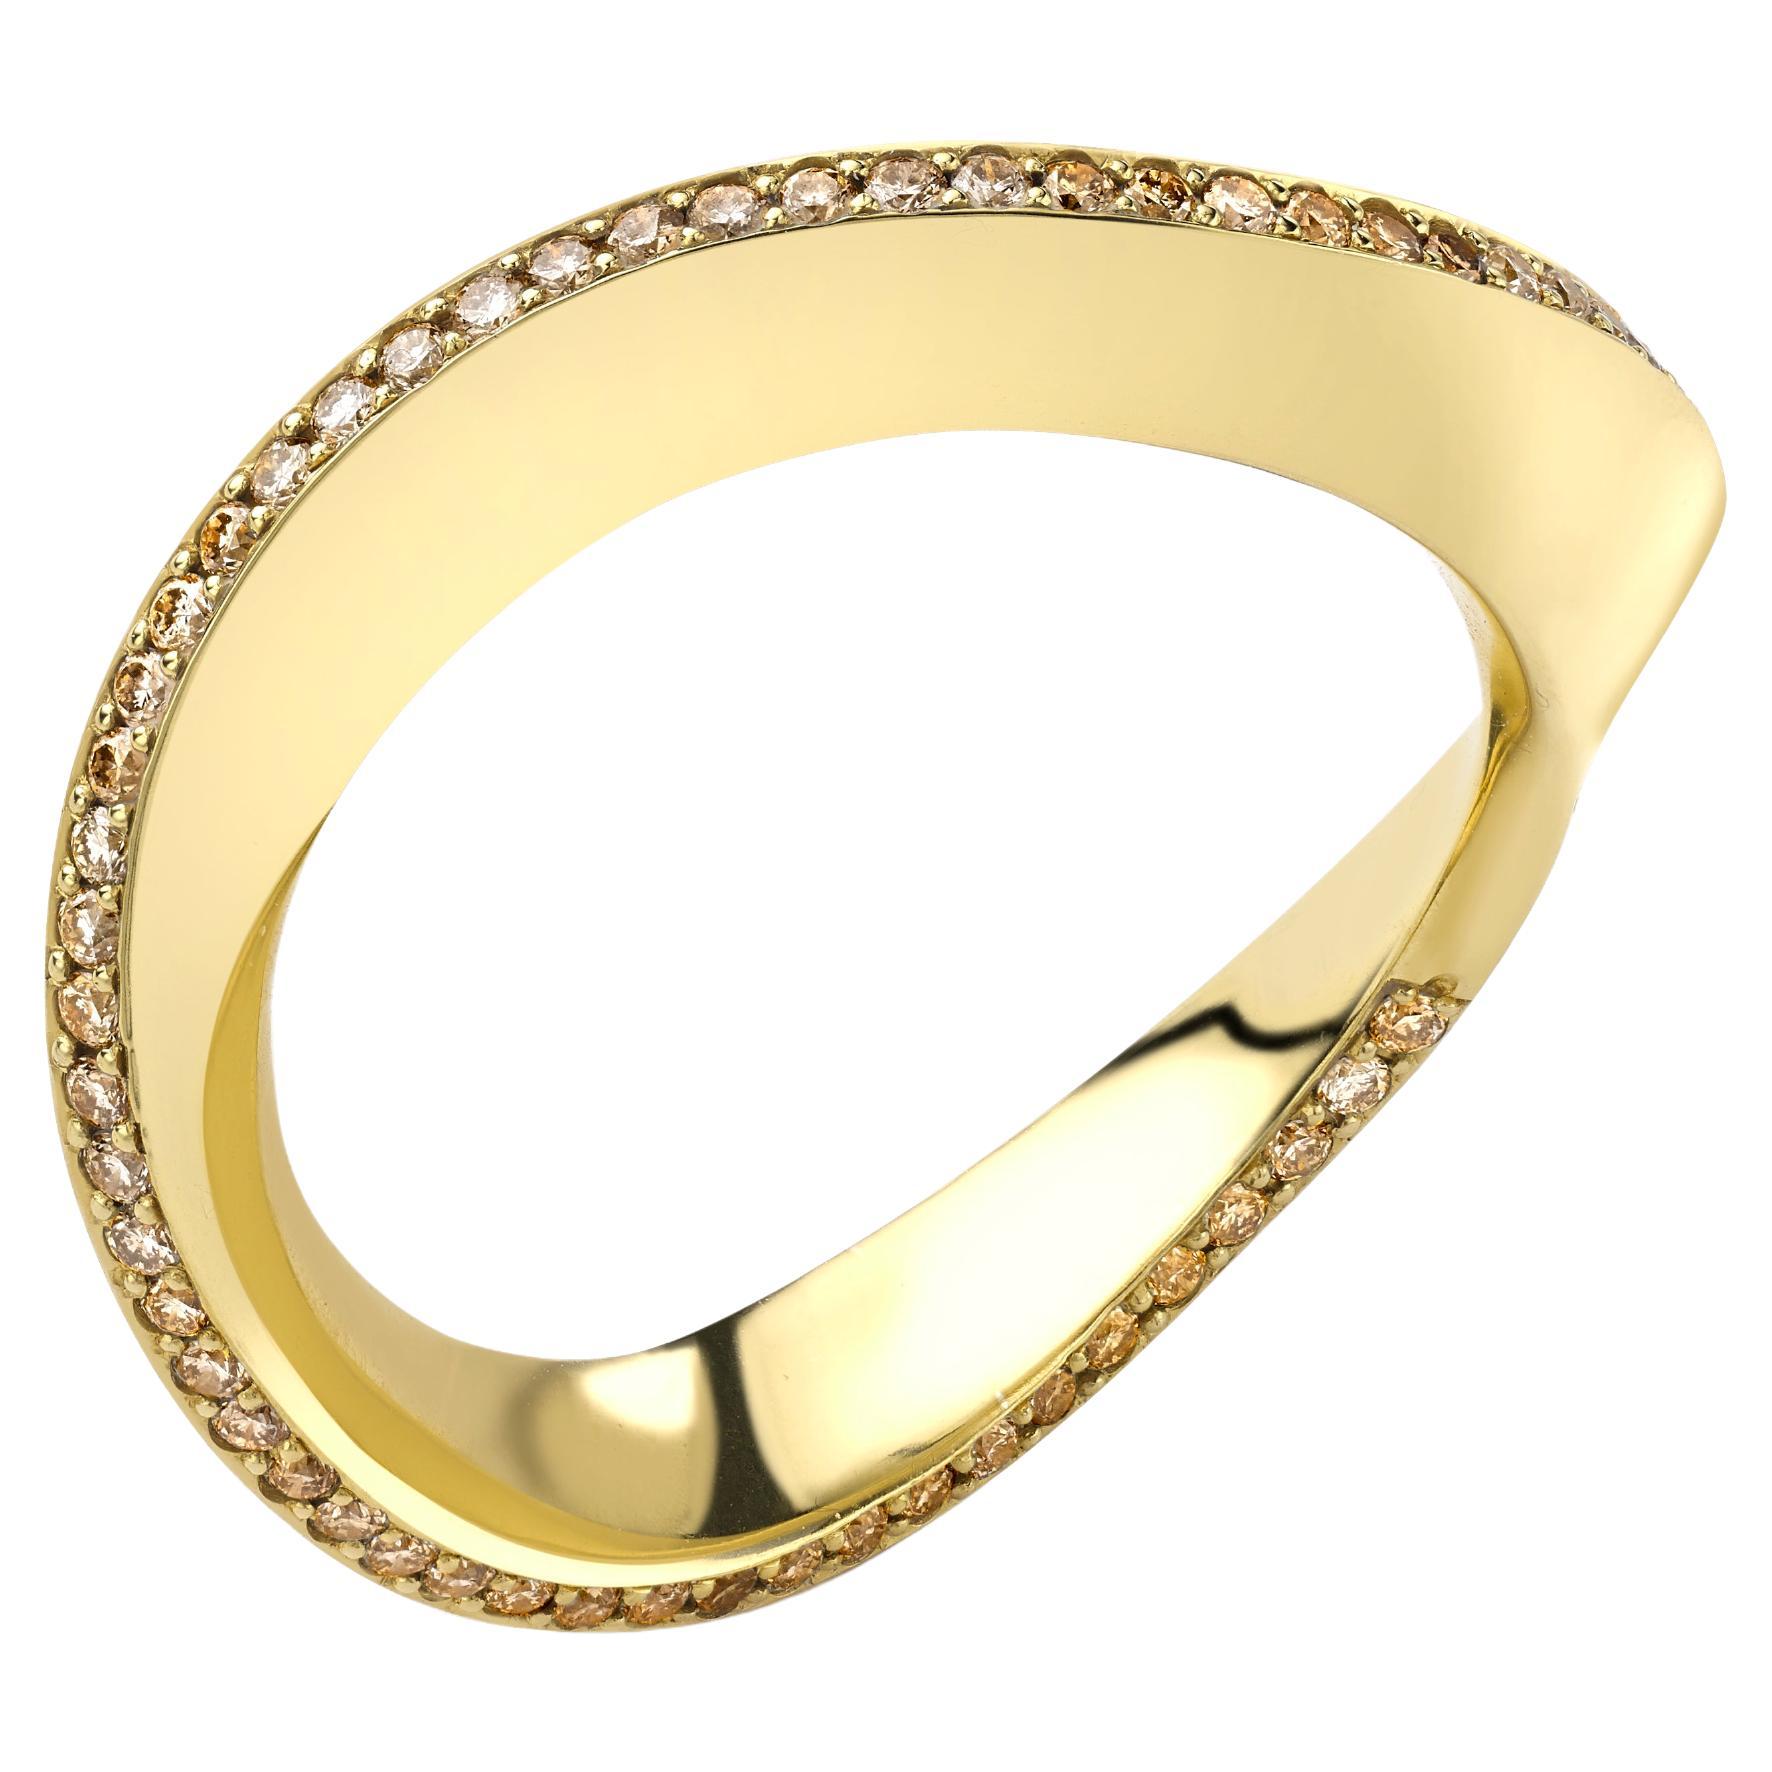 For Sale:   SCHIUMA RING Yellow gold with a warm-tone diamond edge by Liv Luttrell